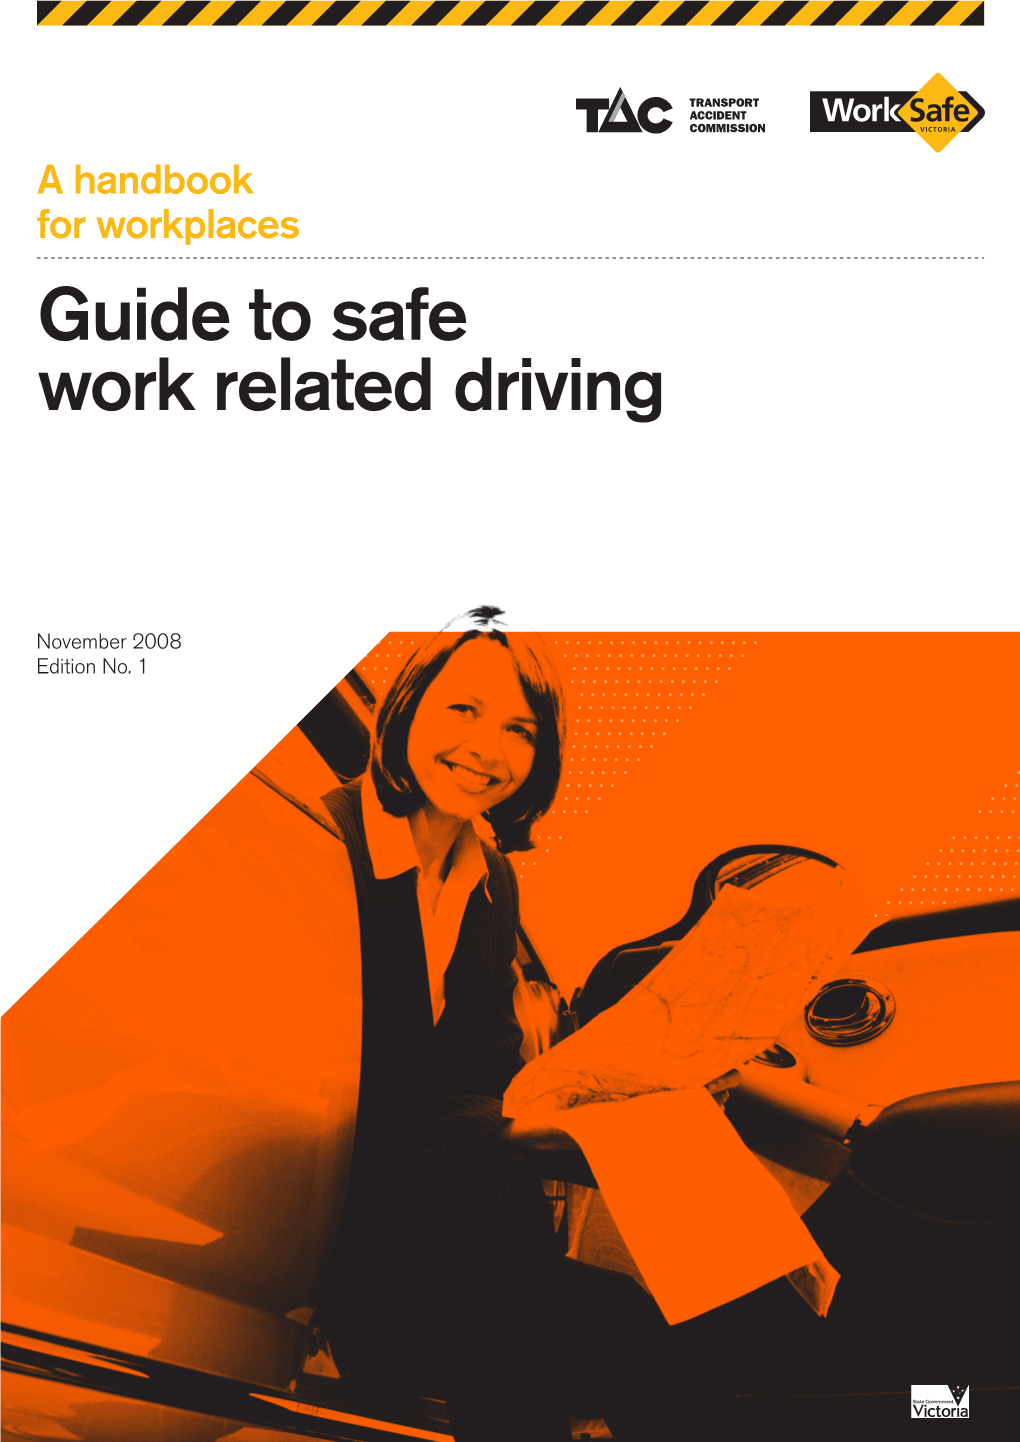 Guide to Safe Work Related Driving, Worksafe